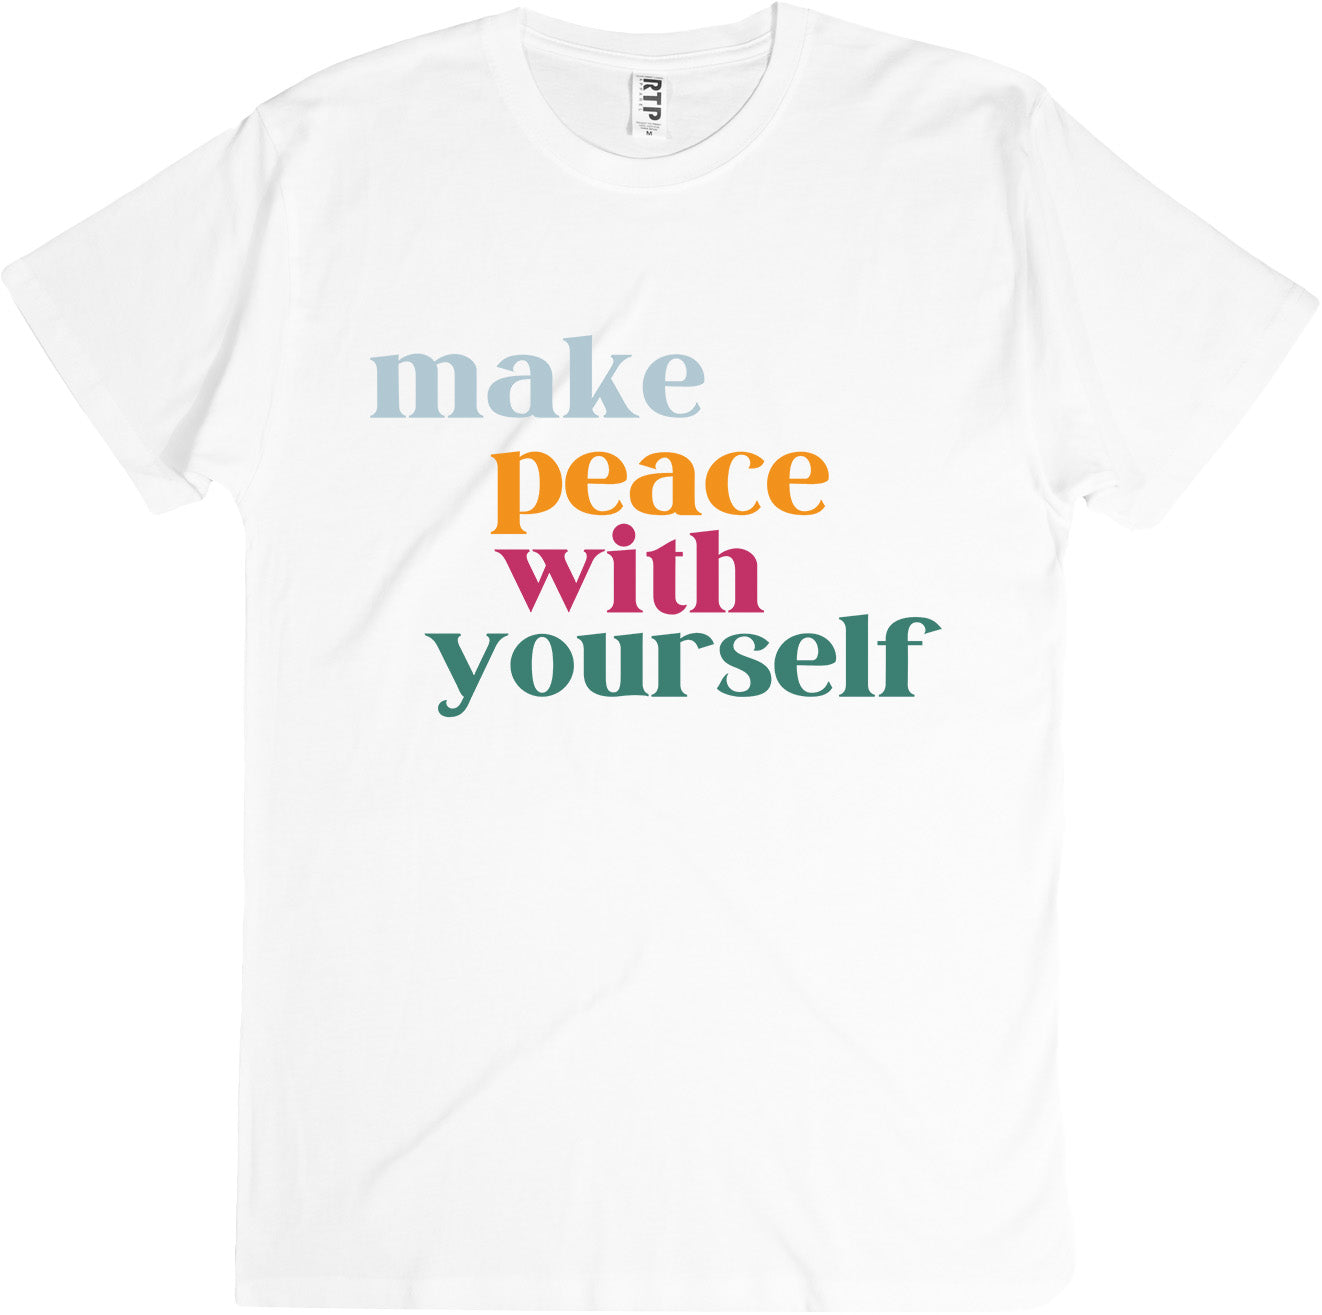 make peace with yourself